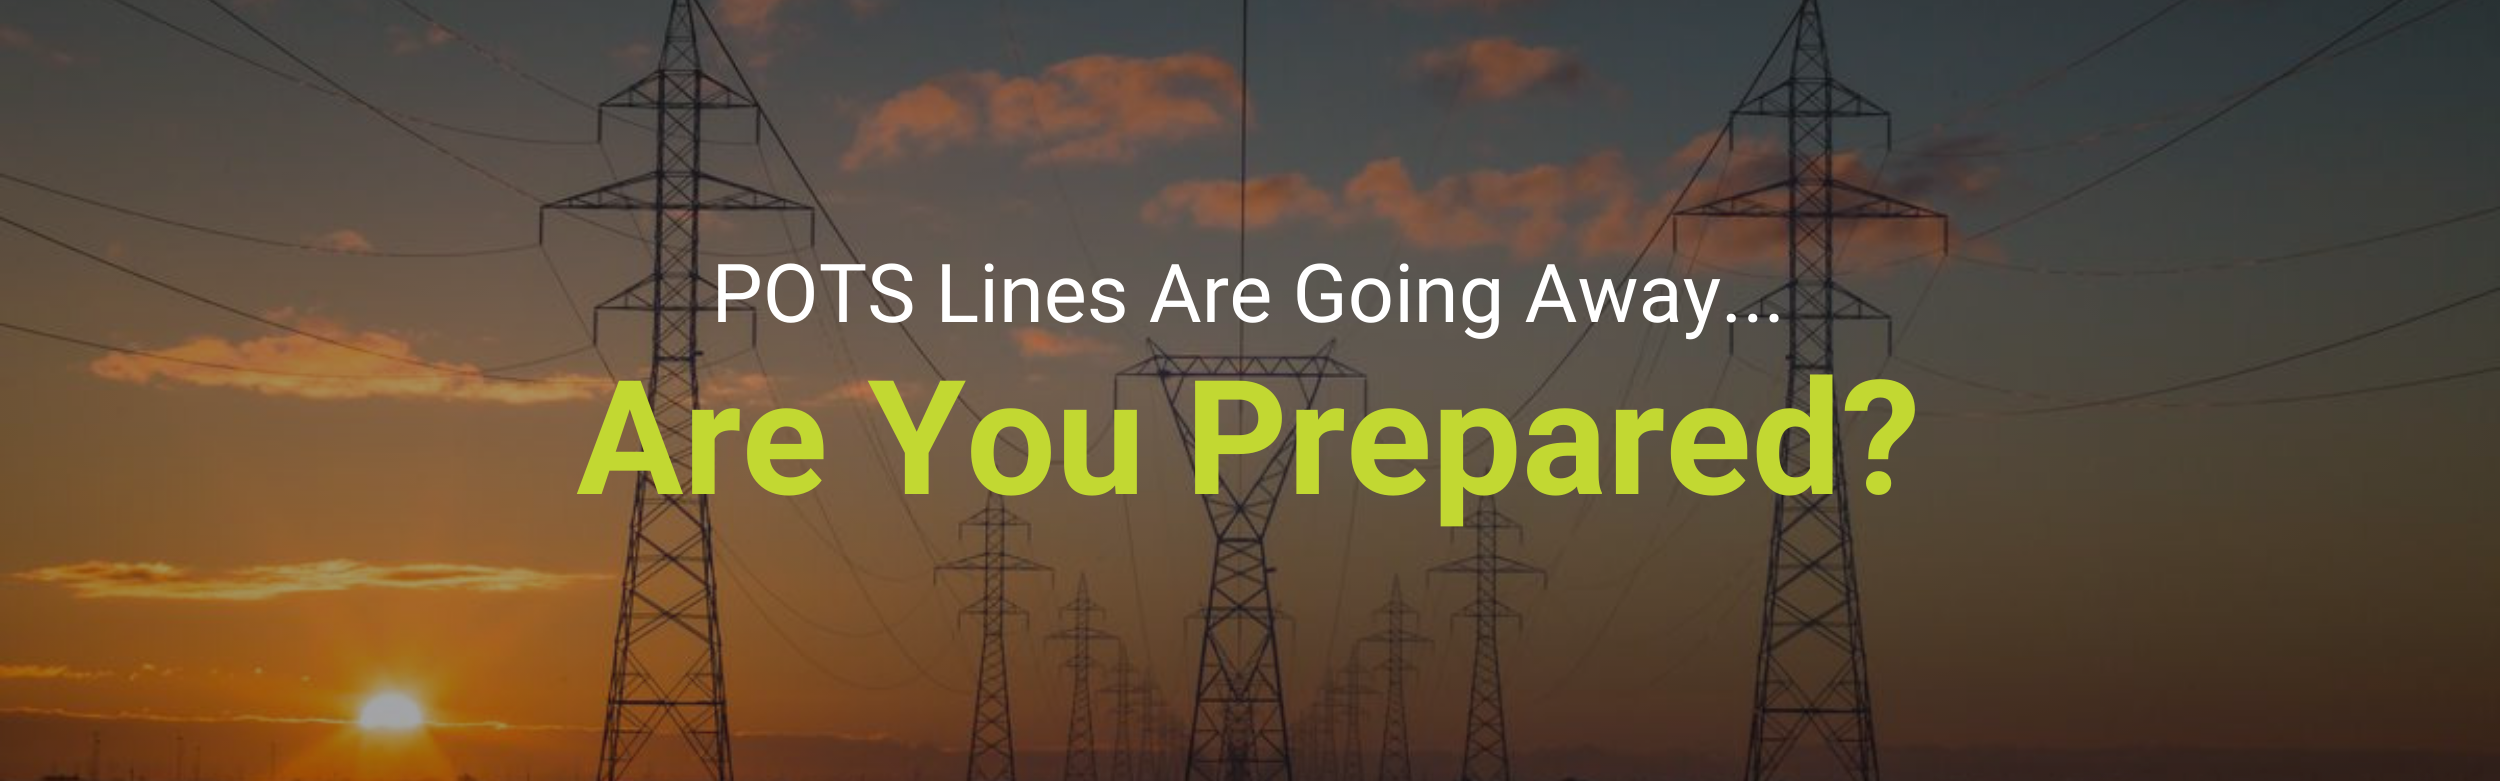 POTS Line Replacement - Are You Prepared